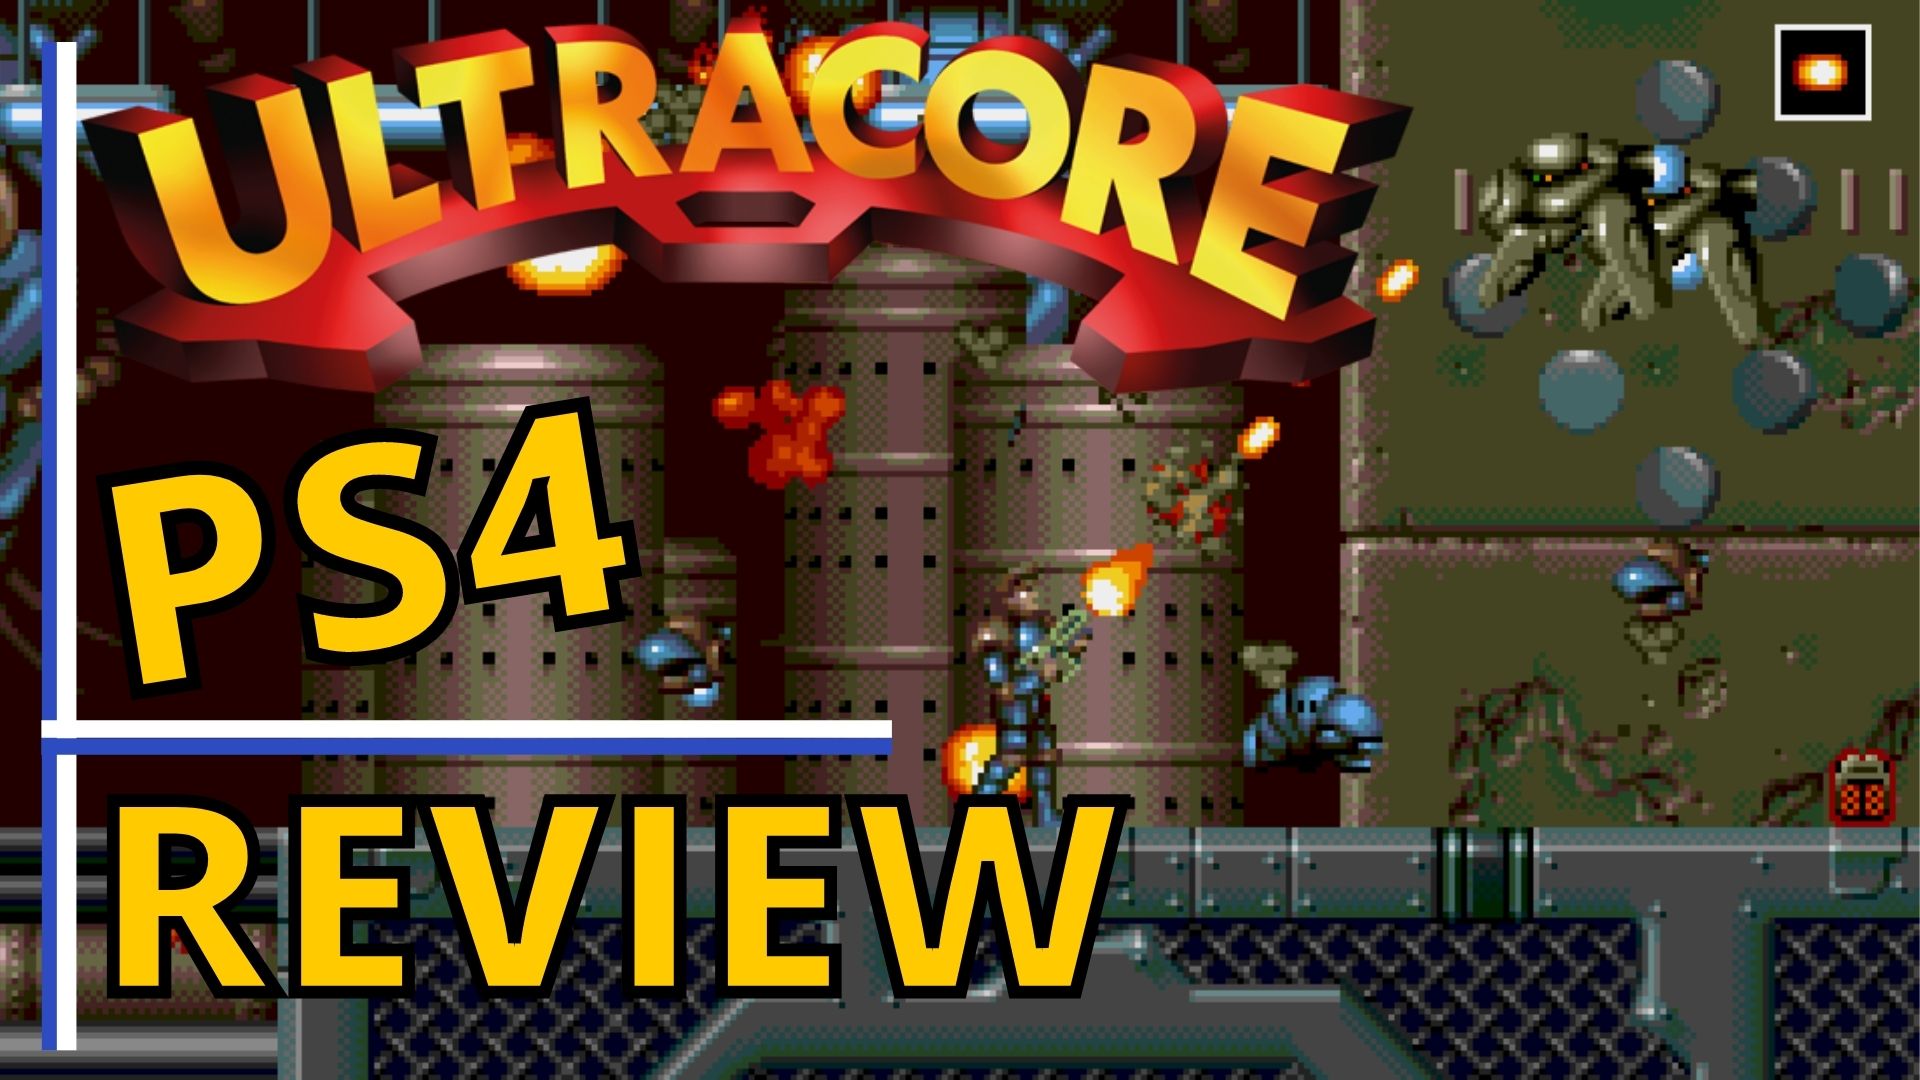 Review: Ultracore - PS4 / PS Vita